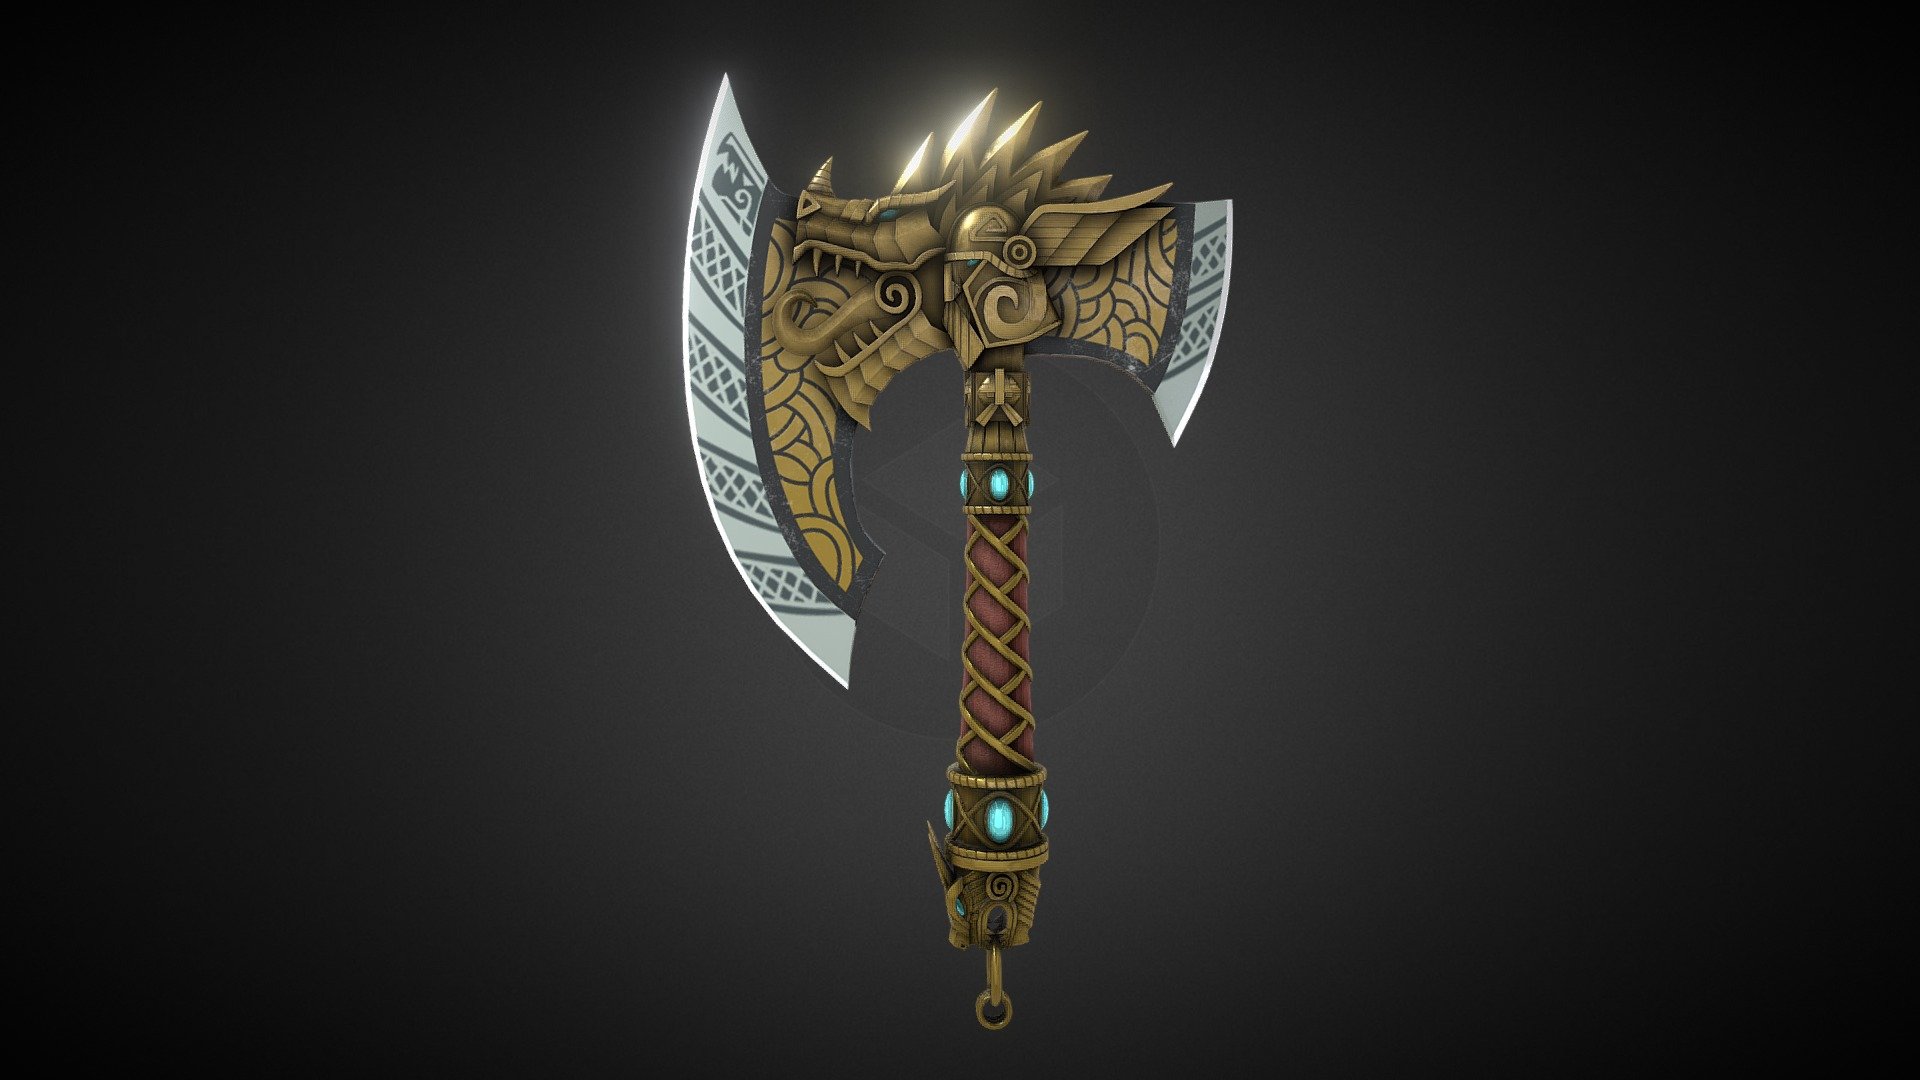 Just another piece for master dwarf, it took me 3 days working on it. i just love the ideal of dwarf's image appear on the head of the item but well&hellip; i gonna just really feel refreshing by sharing this item with a reasonable price  ^,..,^ 
Thanks for having a glance of it!!! - Dwarf axe - Buy Royalty Free 3D model by Art_workshop 3d model